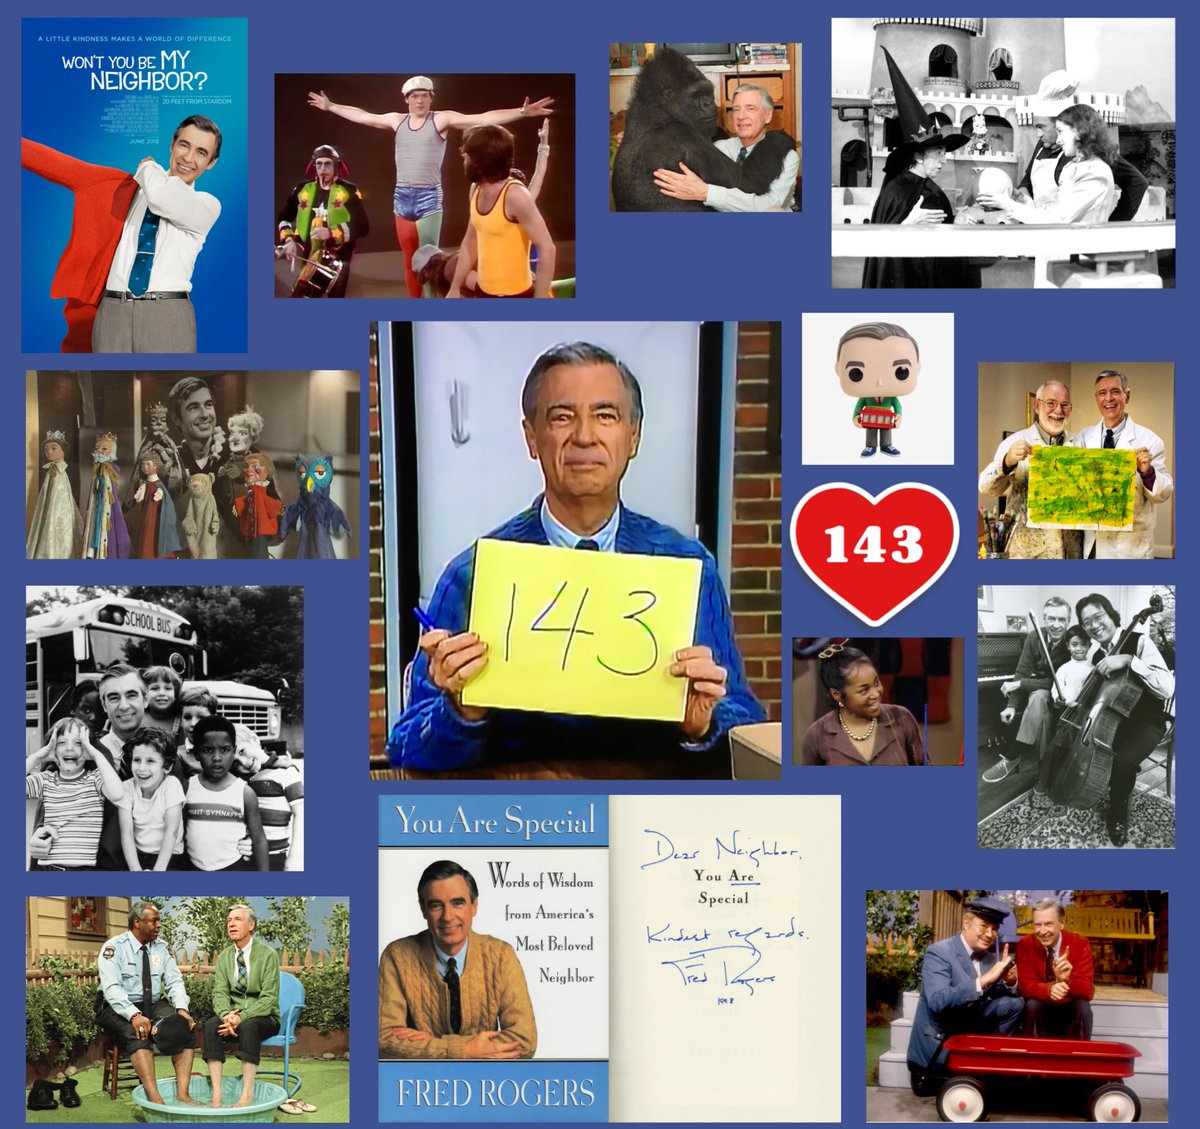 May 23 was #143Day, neighbors. Whether you said, 'I love you,' or '143”, there are many ways to let someone know you care about them. #FredRogers #MisterRogersNeighborhood #WontYouBeMyNeighbor